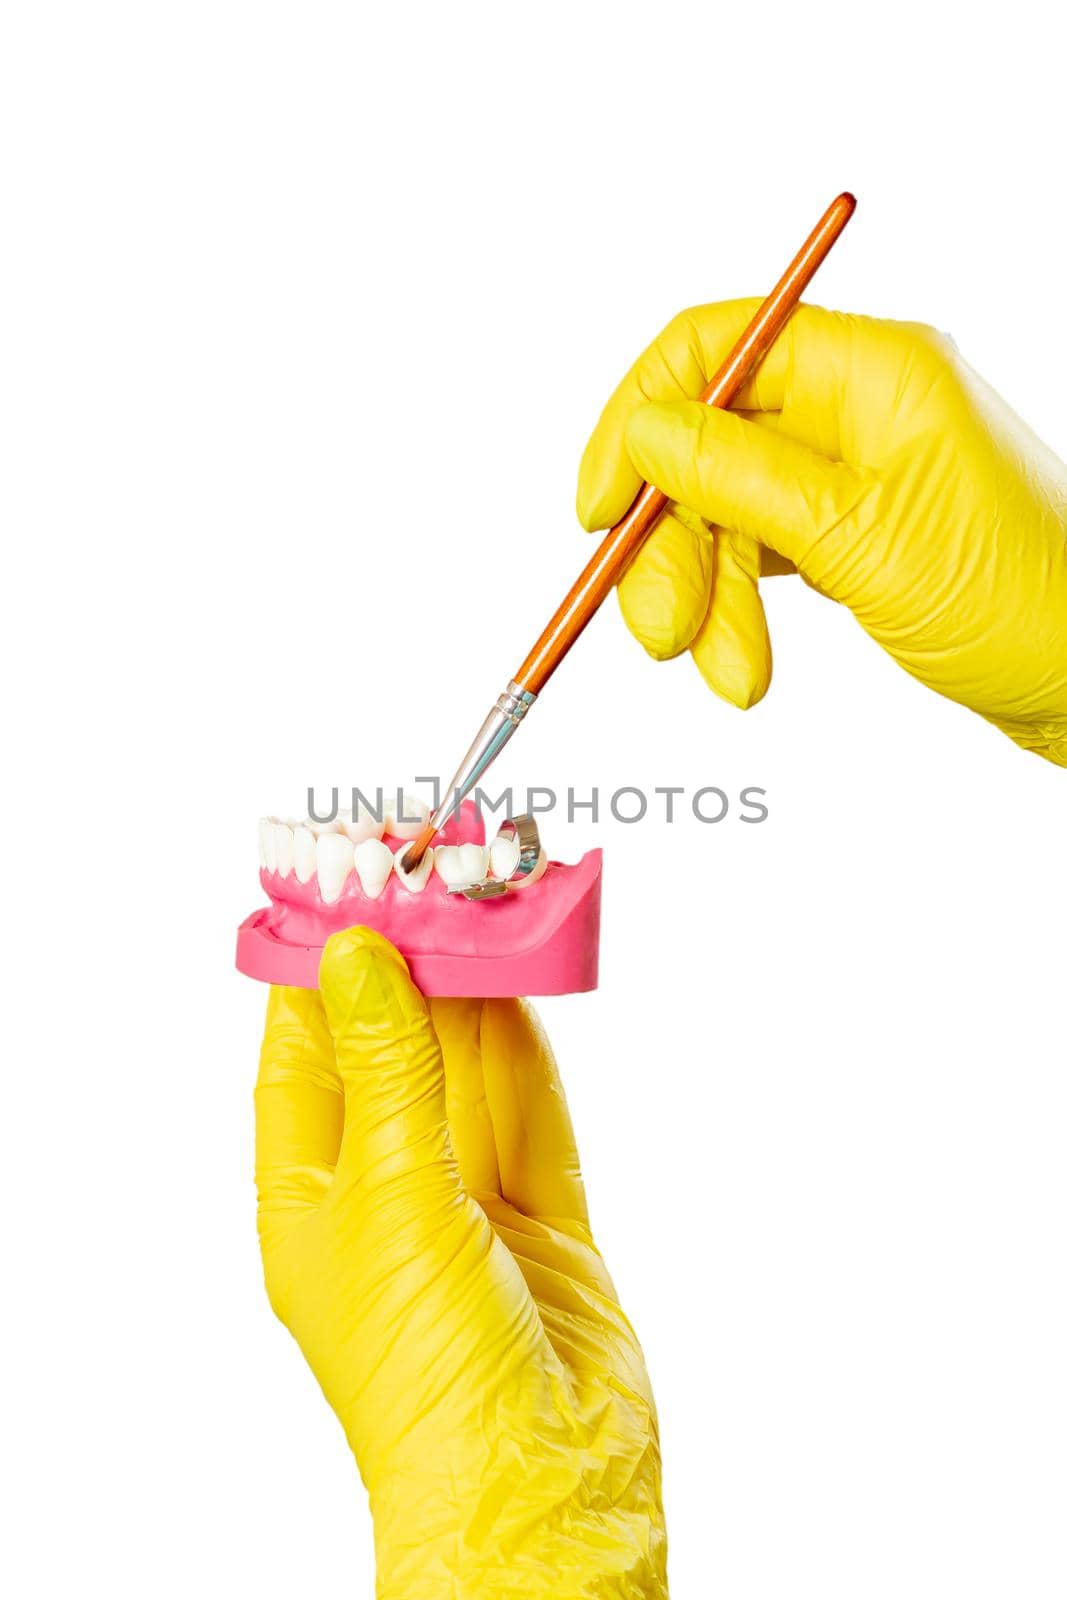 Dentist's hands with layout of human jaw and brush. by mvg6894